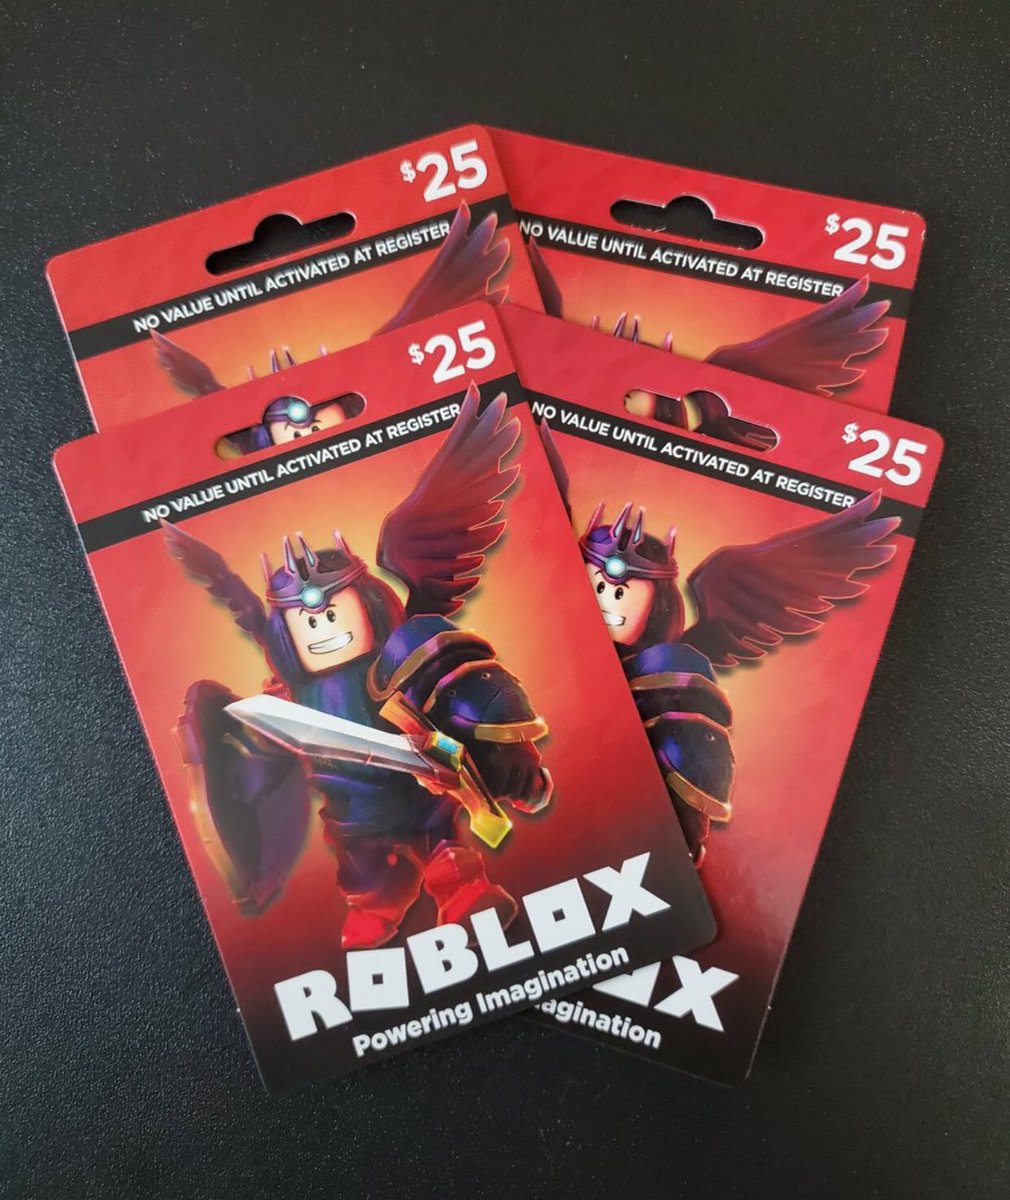 On Twitter 25 Giftcard Giveaway 4 Winners How To Enter Retweet Like Comment Your Username And Subscribe To My Channel Https T Co M33ia1tstr Tag 5 Friends Good Luck Extra - 40 subscriber giveaway roblox youtube